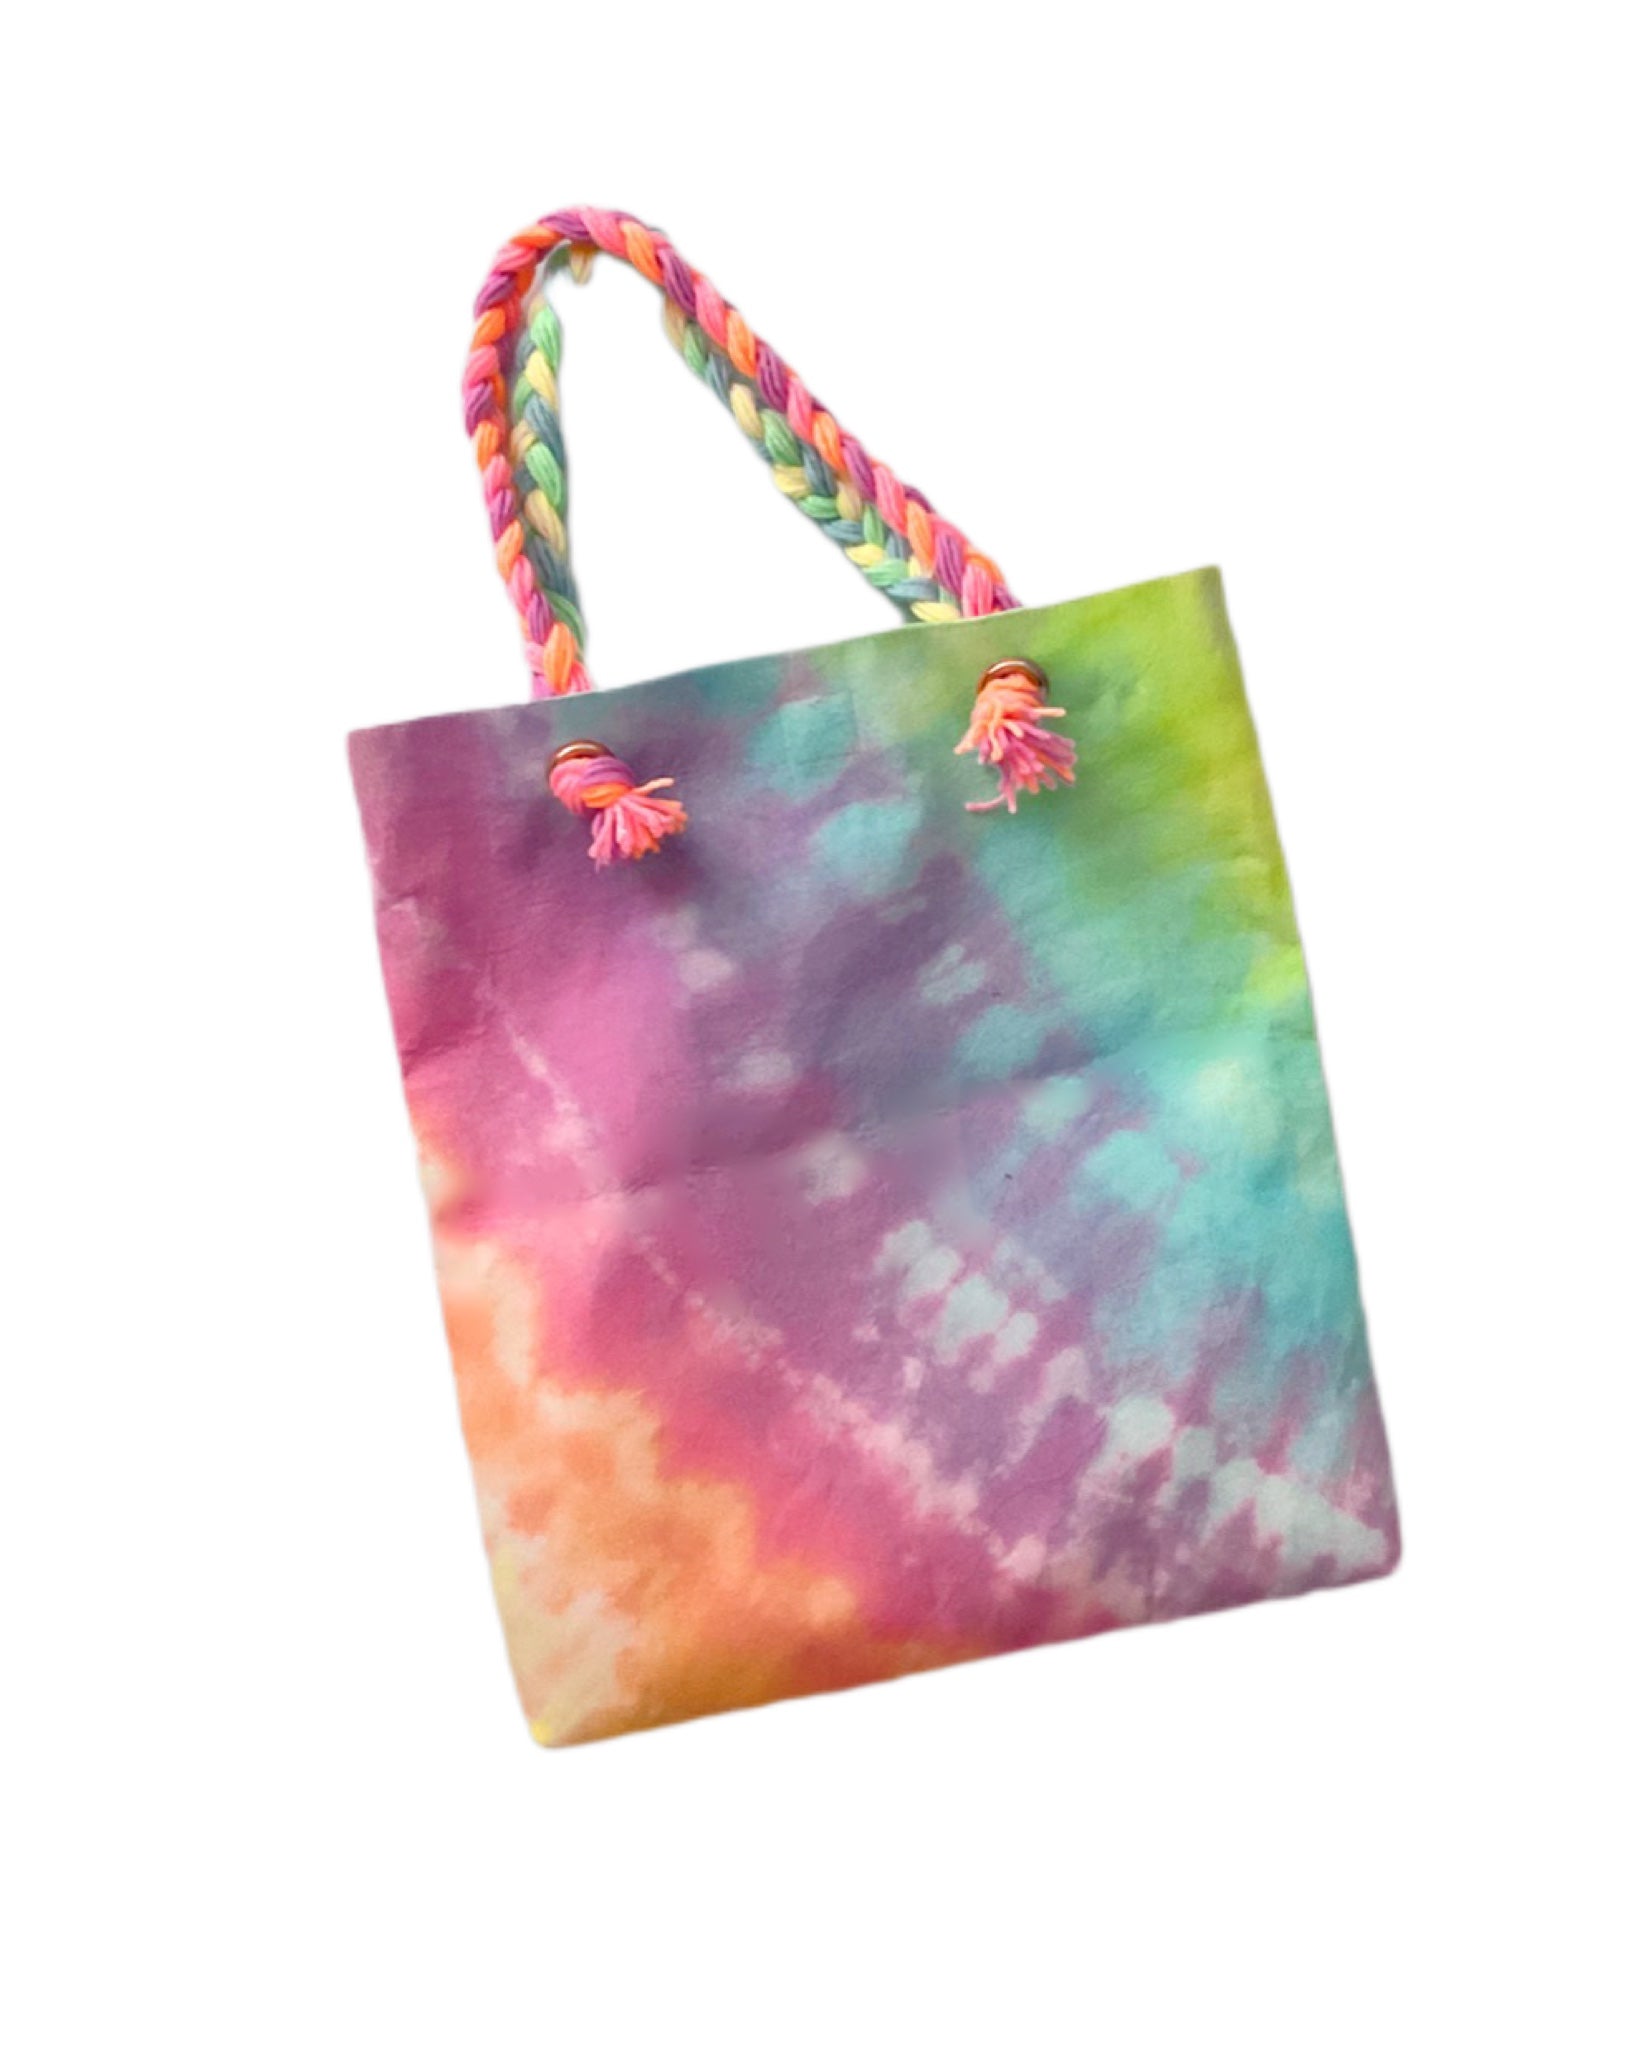 How to make your own Tie Dye Bag  YouTube